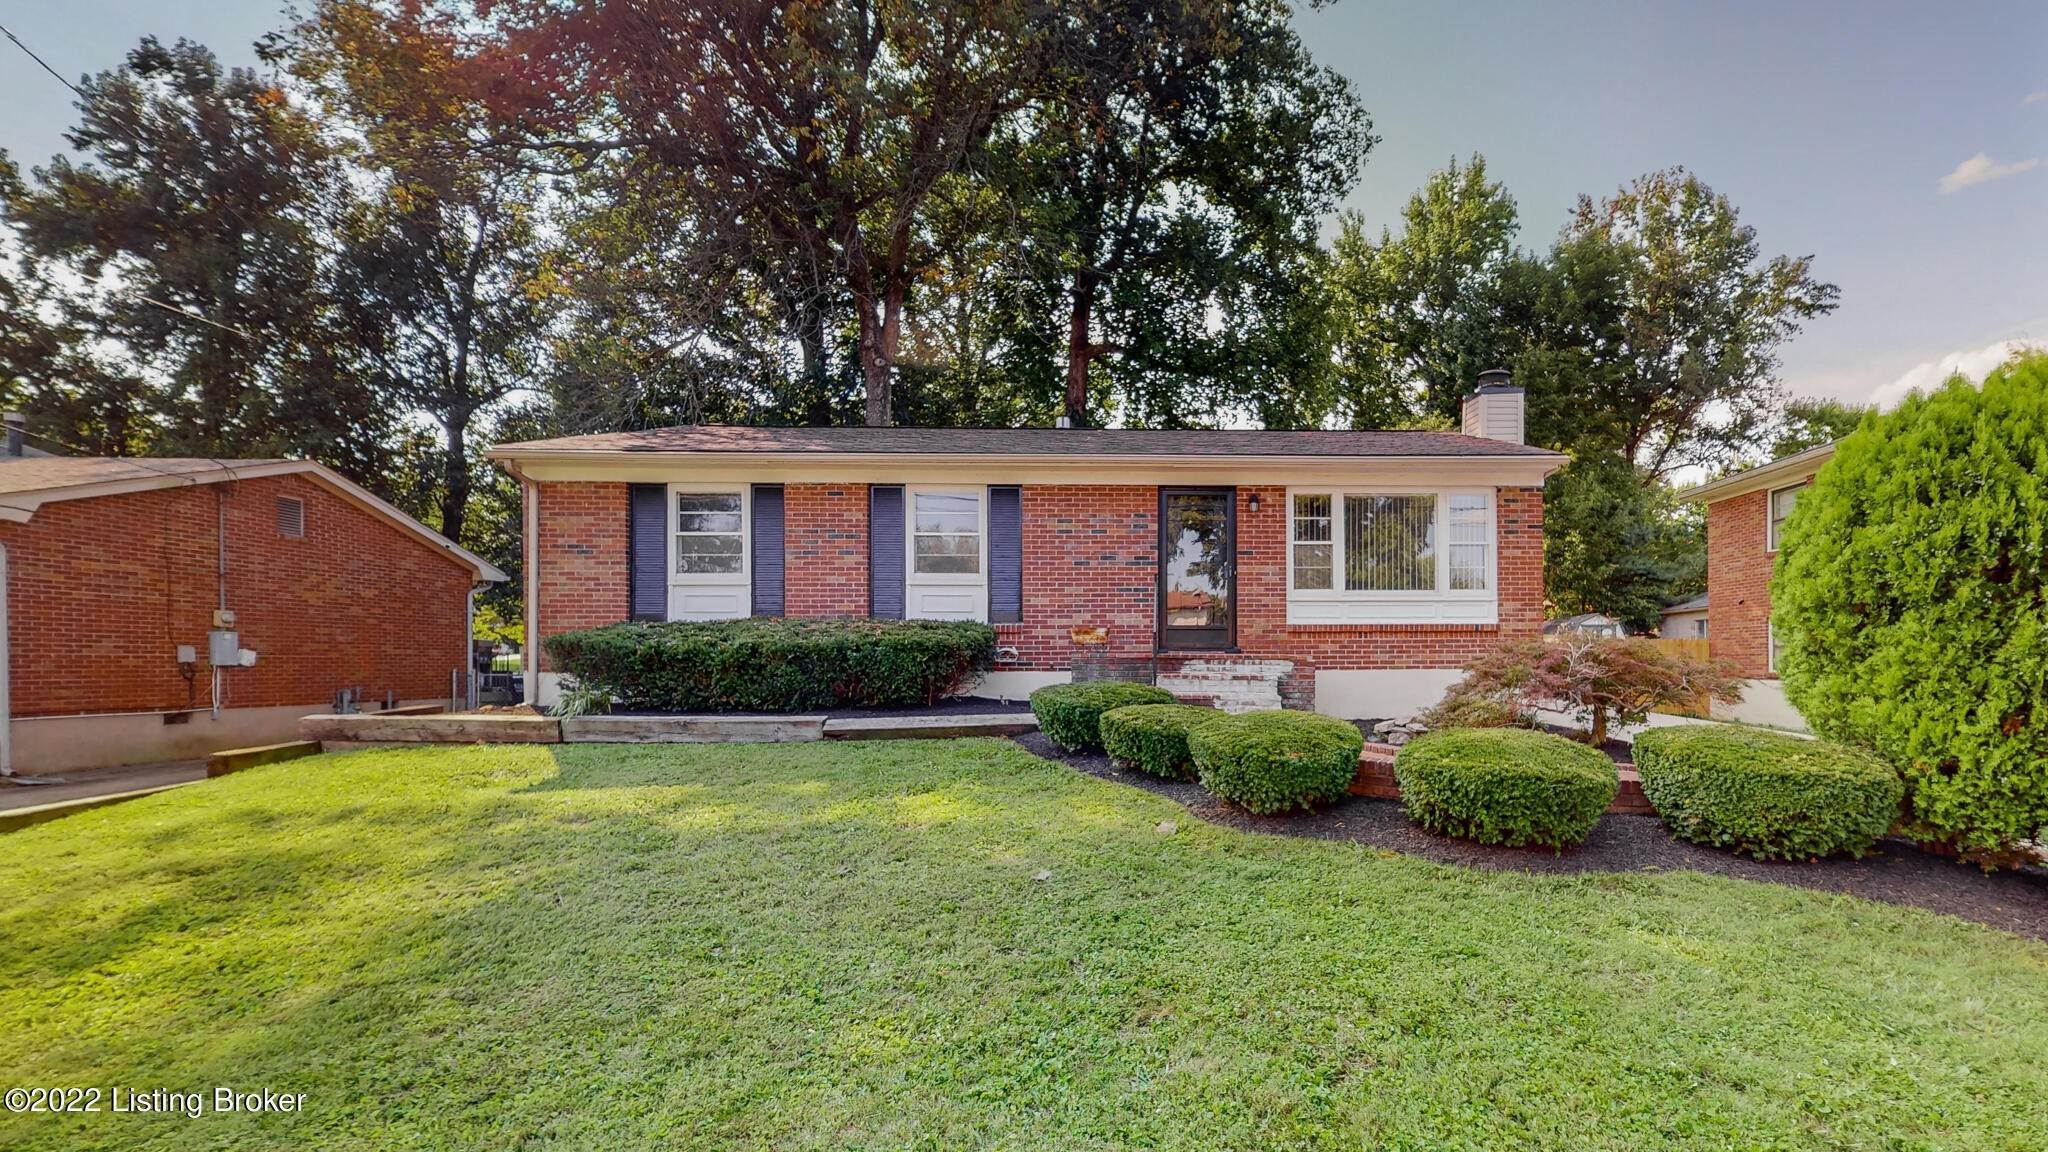 42. Single Family at Louisville, KY 40291